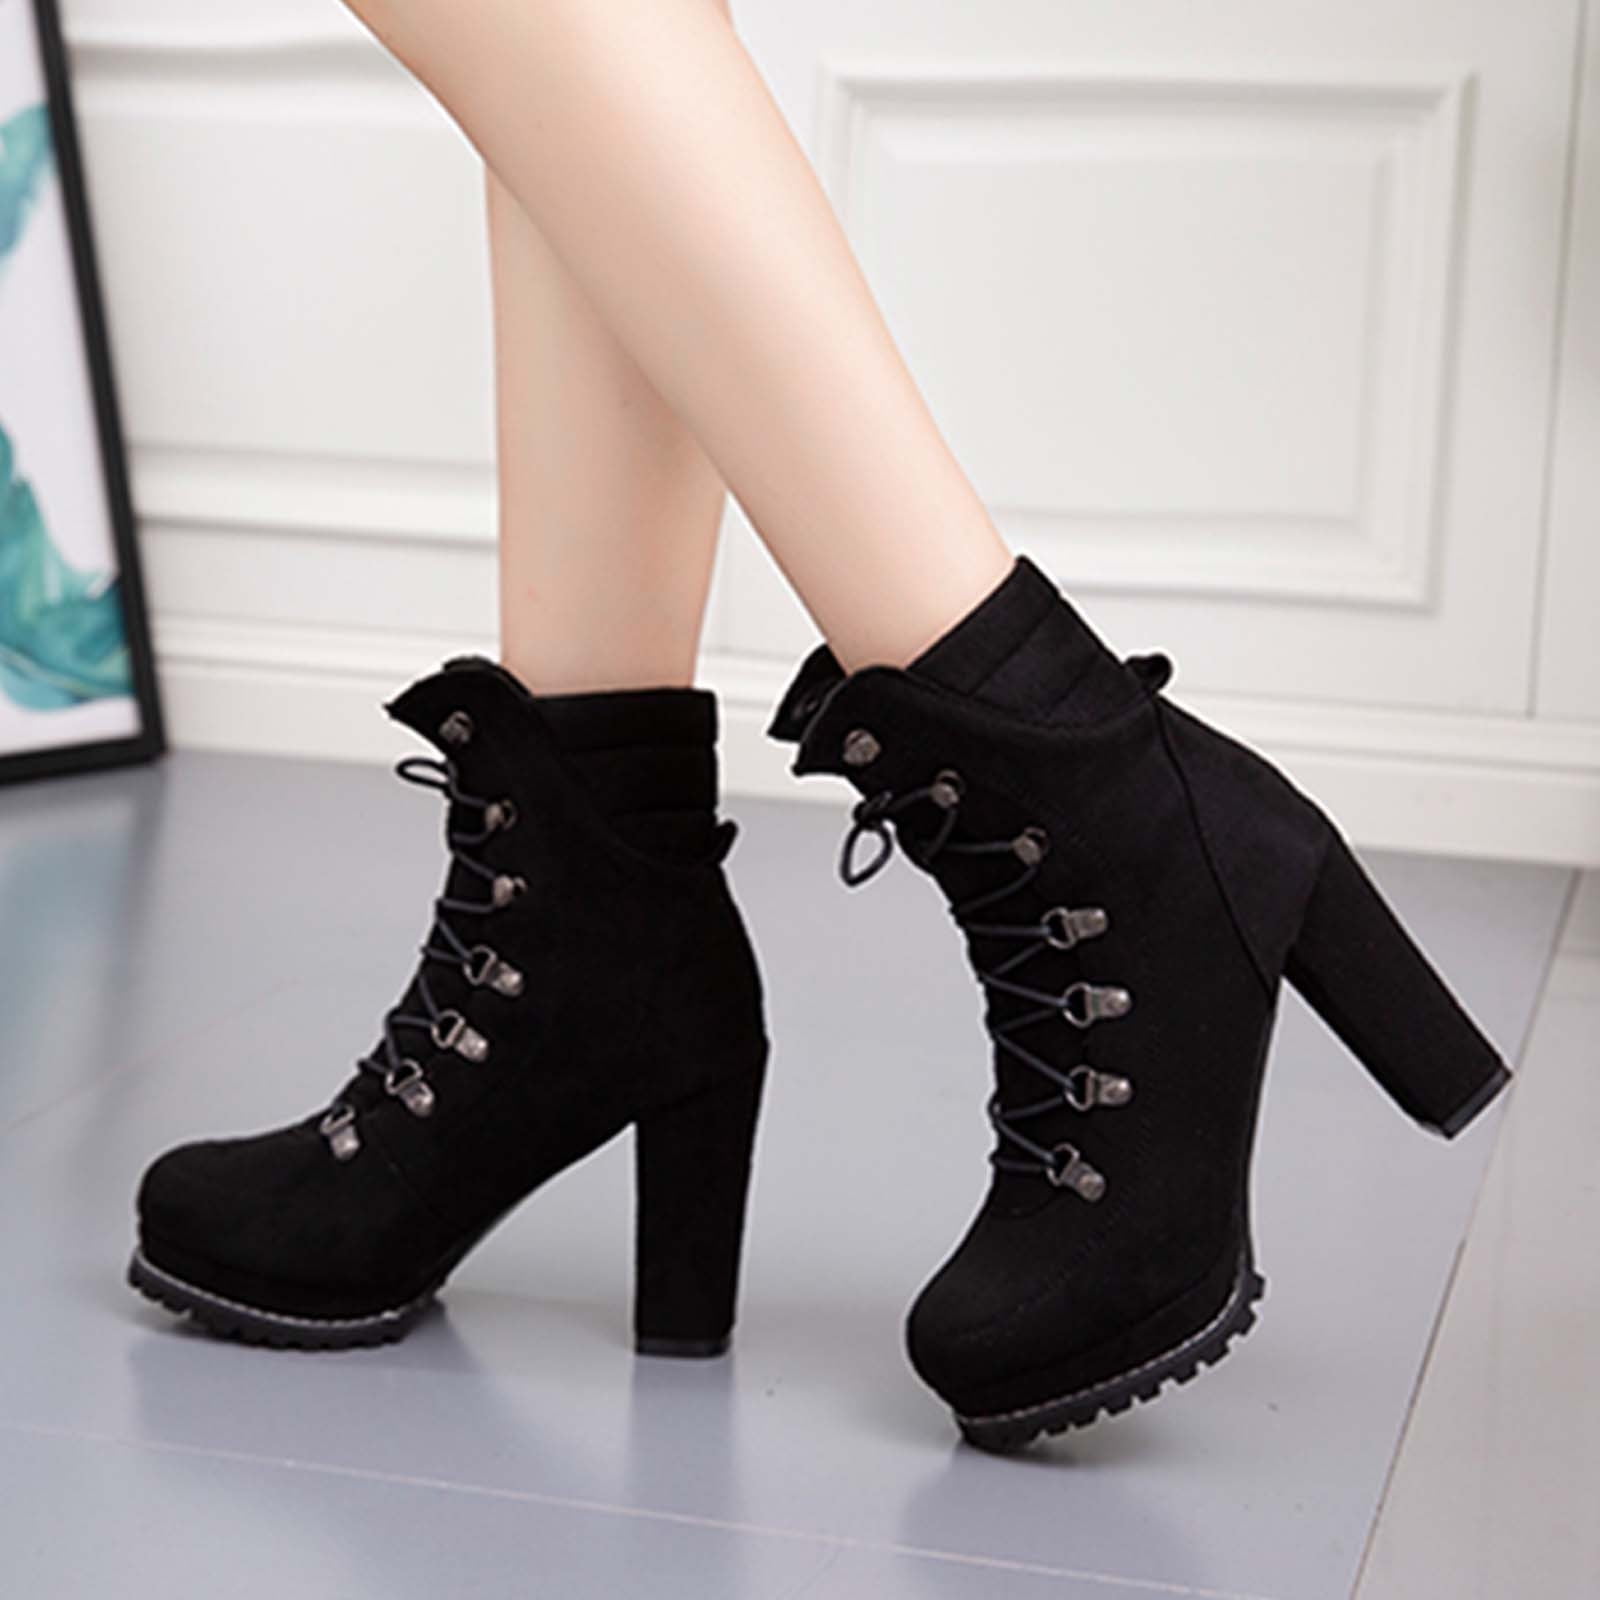 Black & Red Platform High Heels Shoes Round Toe Lace Up Thigh Boots